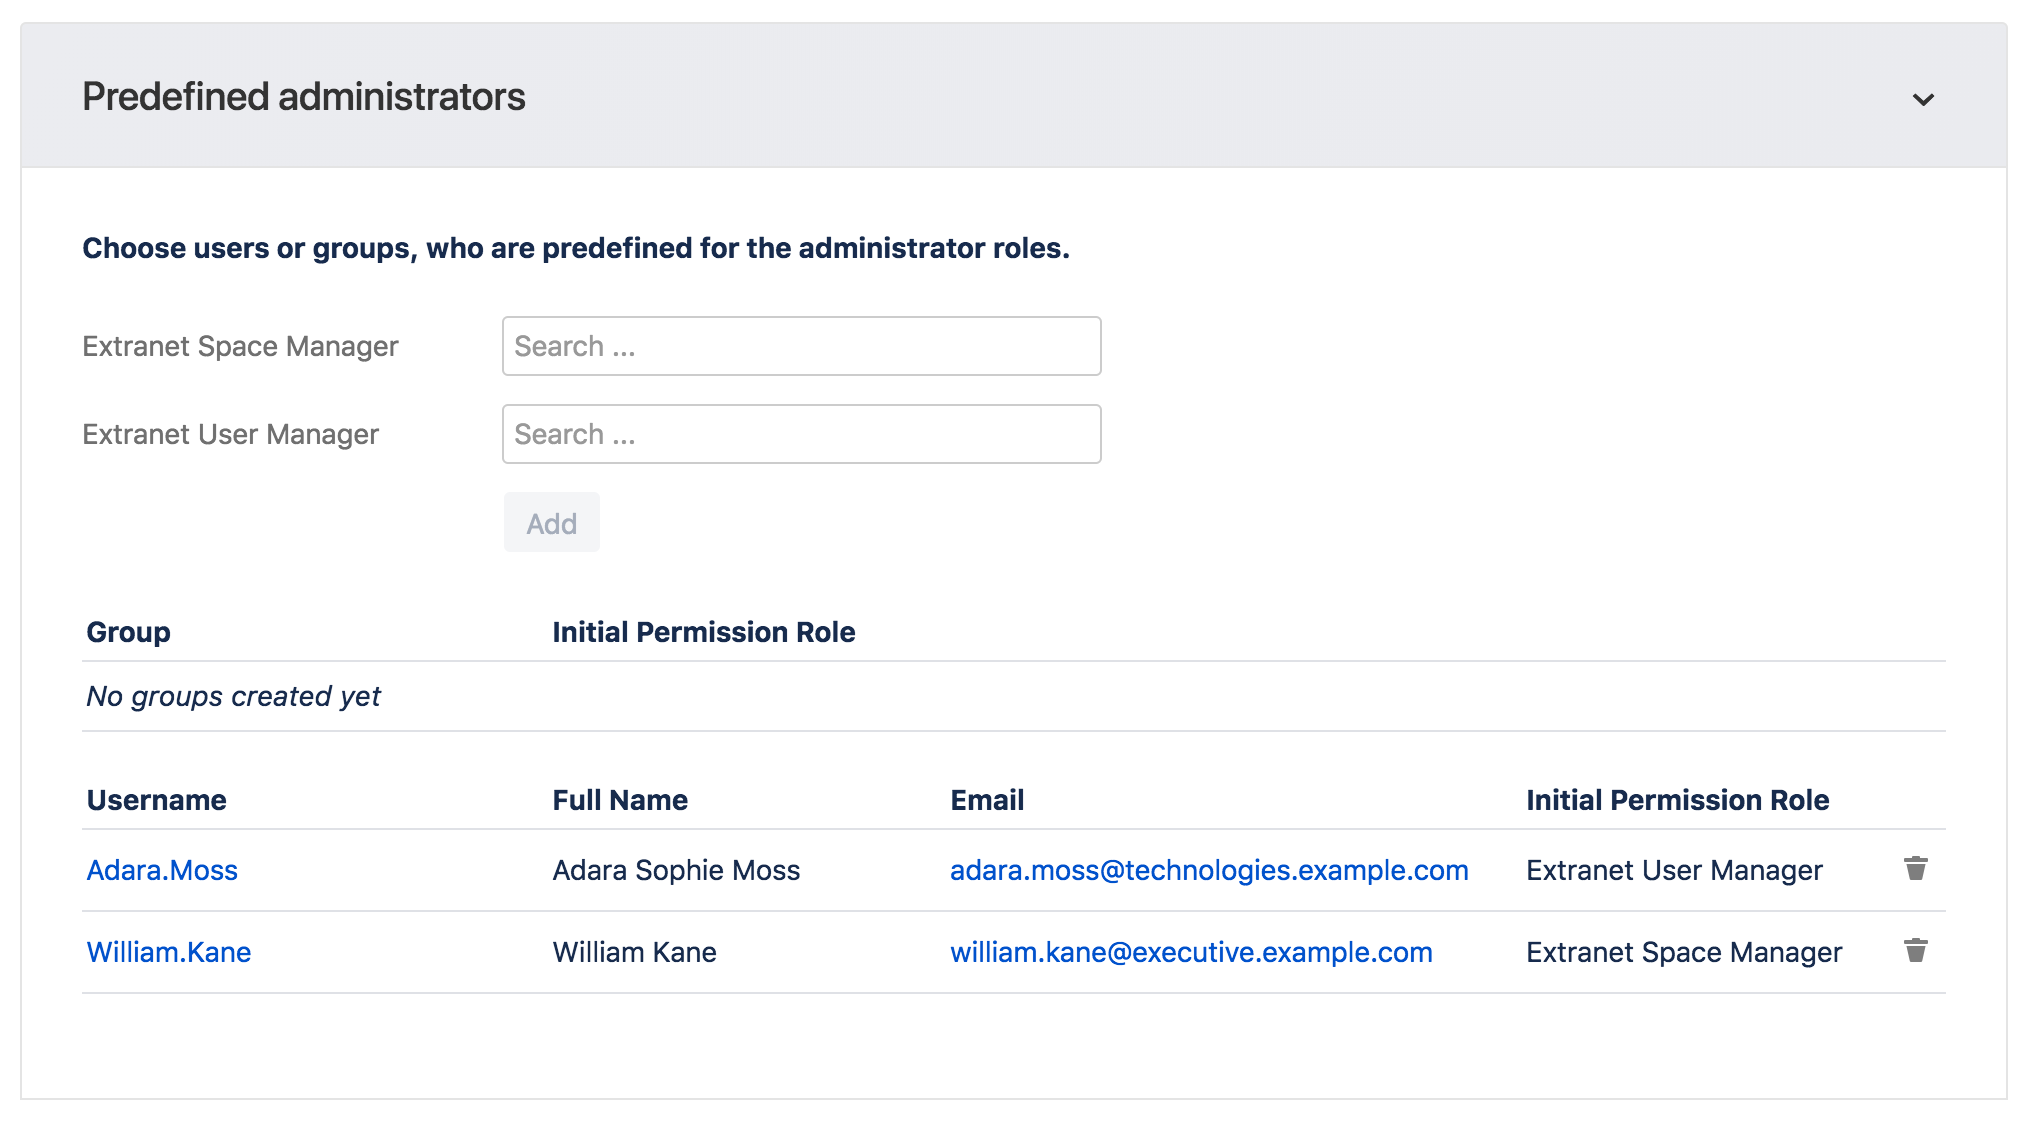 There are also predefined administrator roles without administrator permissions.